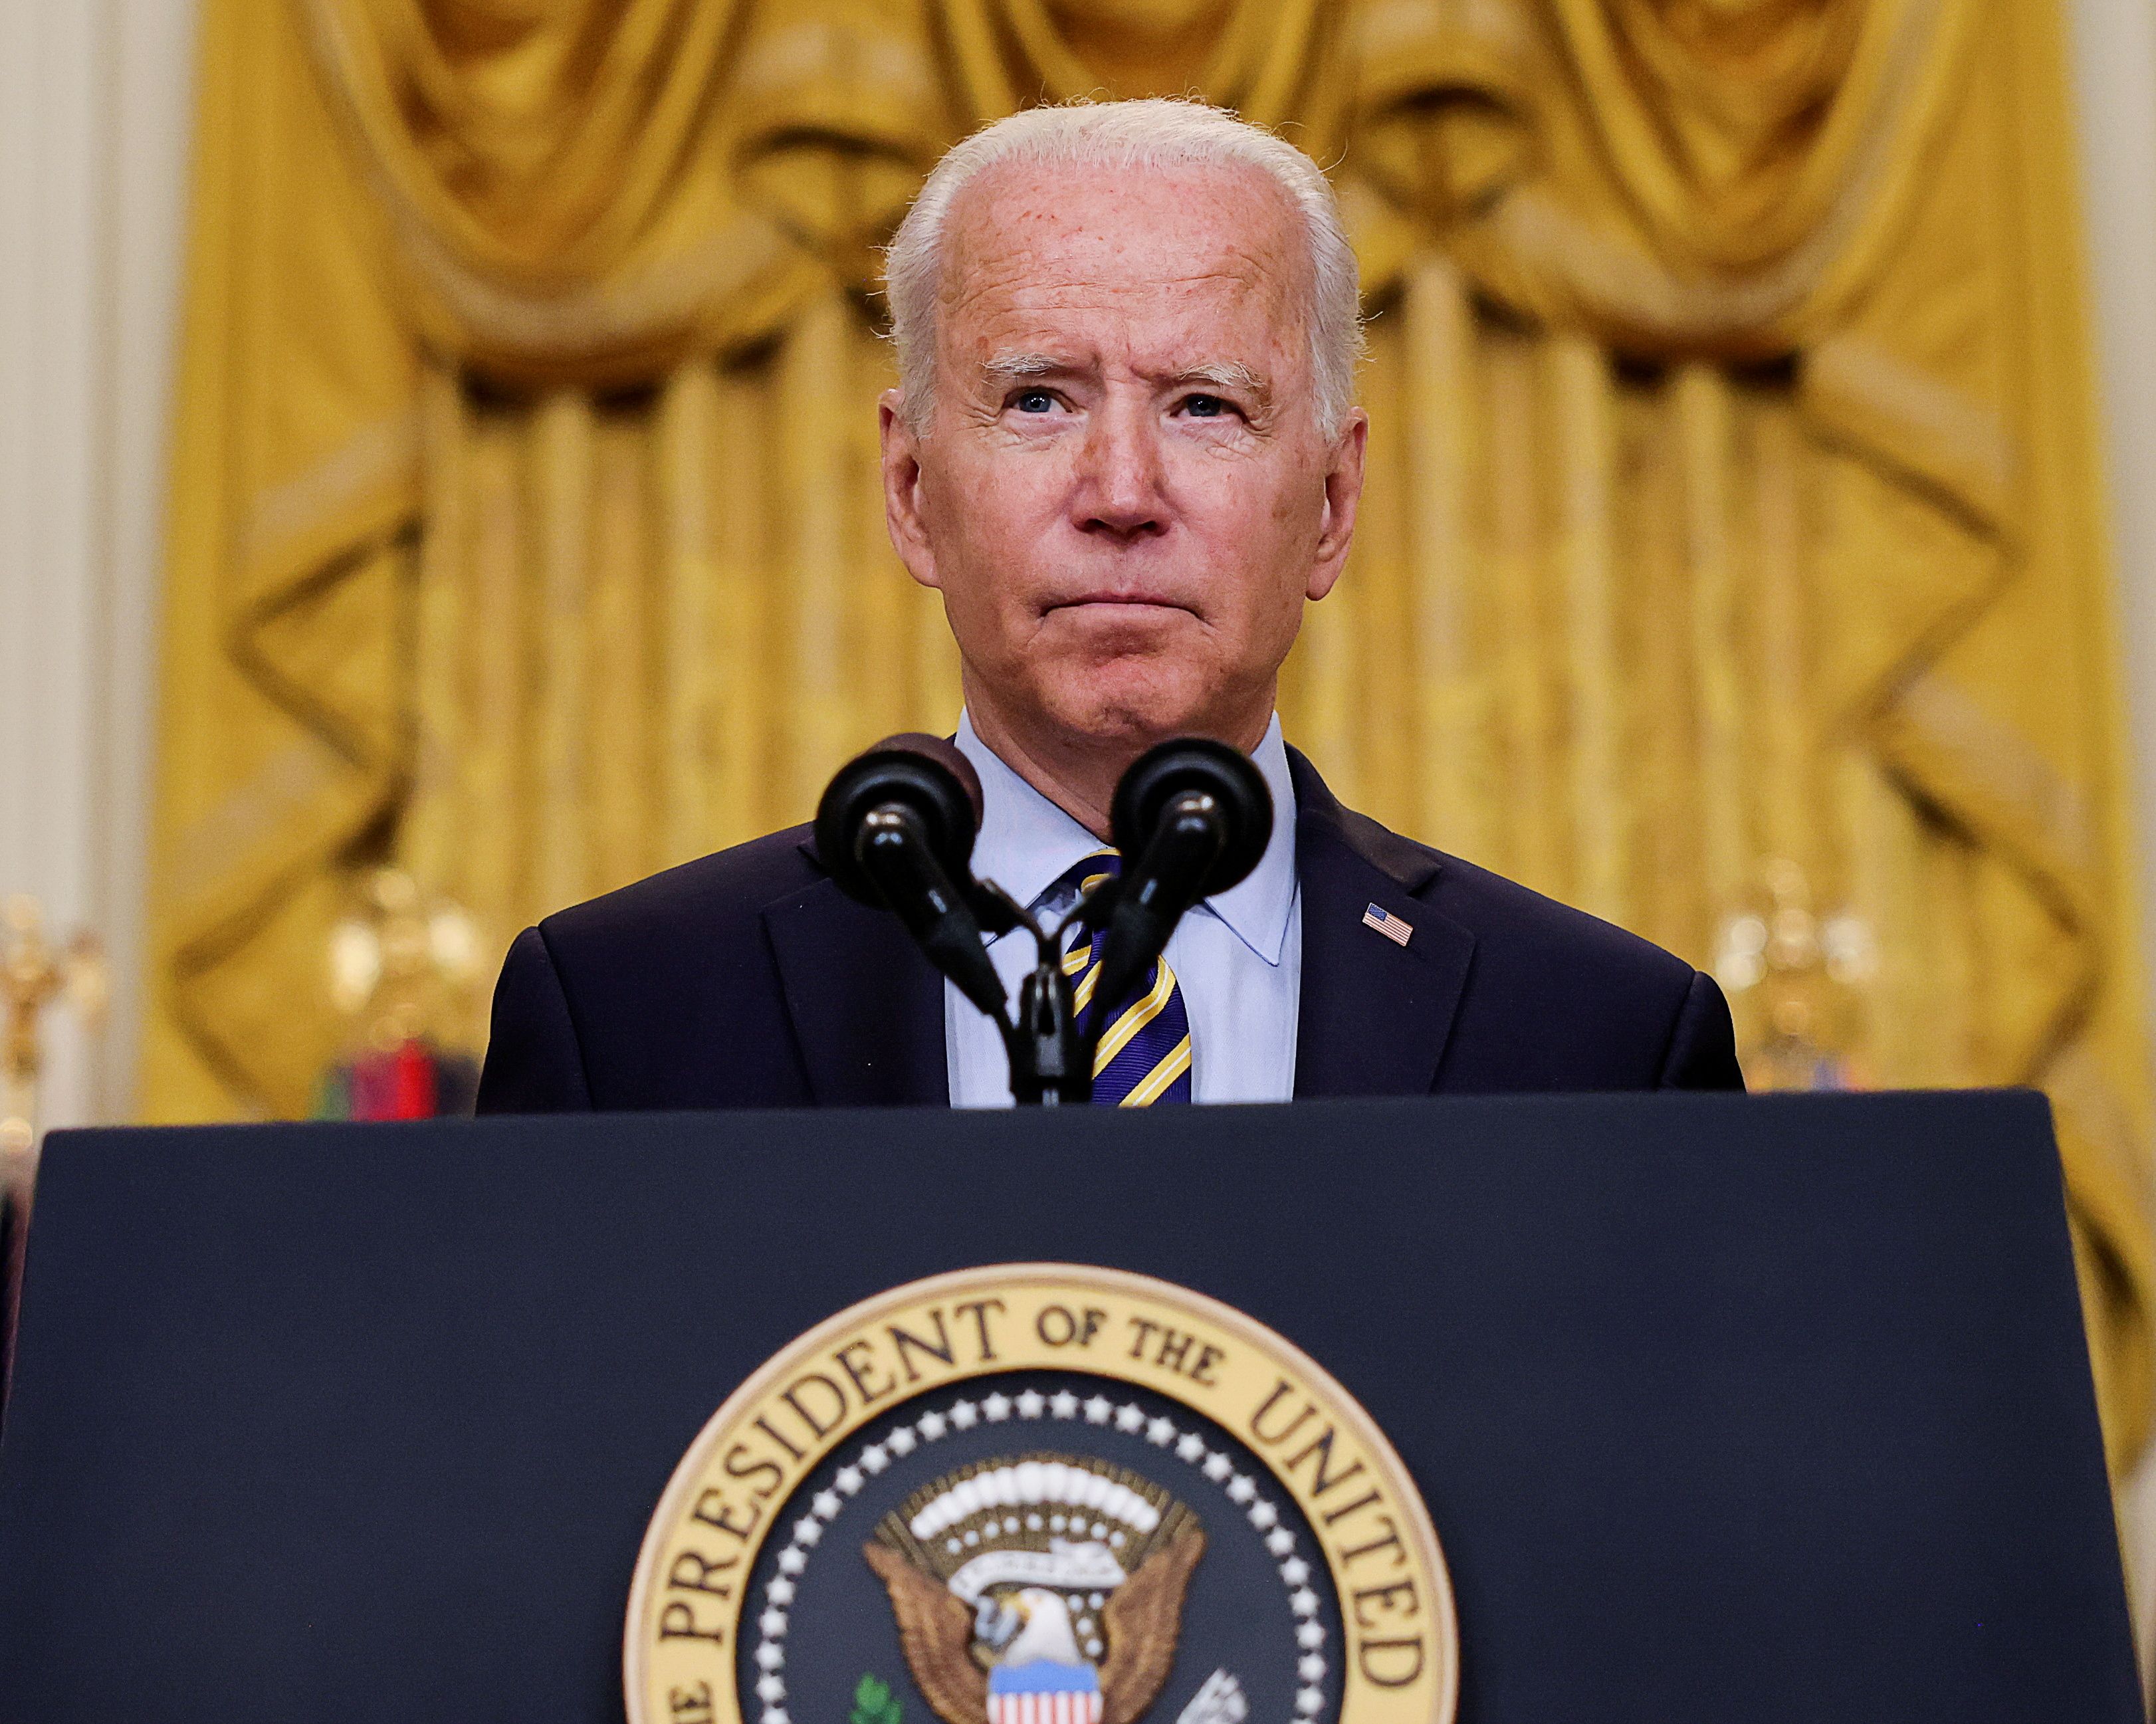 U.S. President Biden speaks about U.S. withdrawal from Afghanistan at the White House in Washington